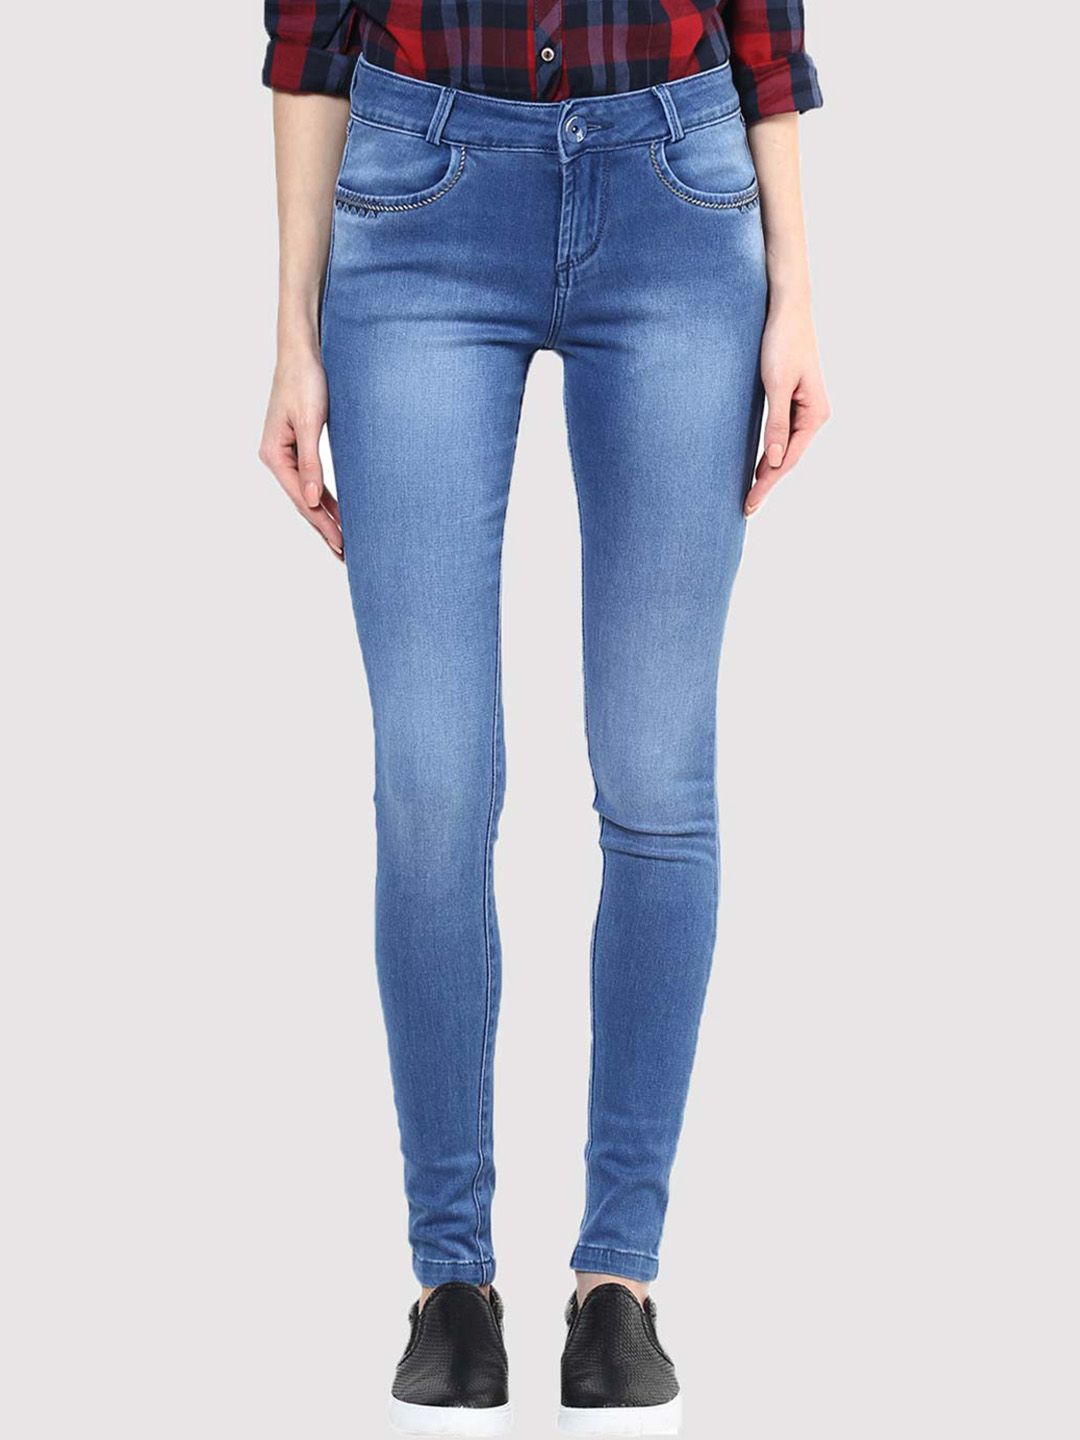 Xpose Women Blue Comfort Slim Fit Stretchable Jeans Price in India